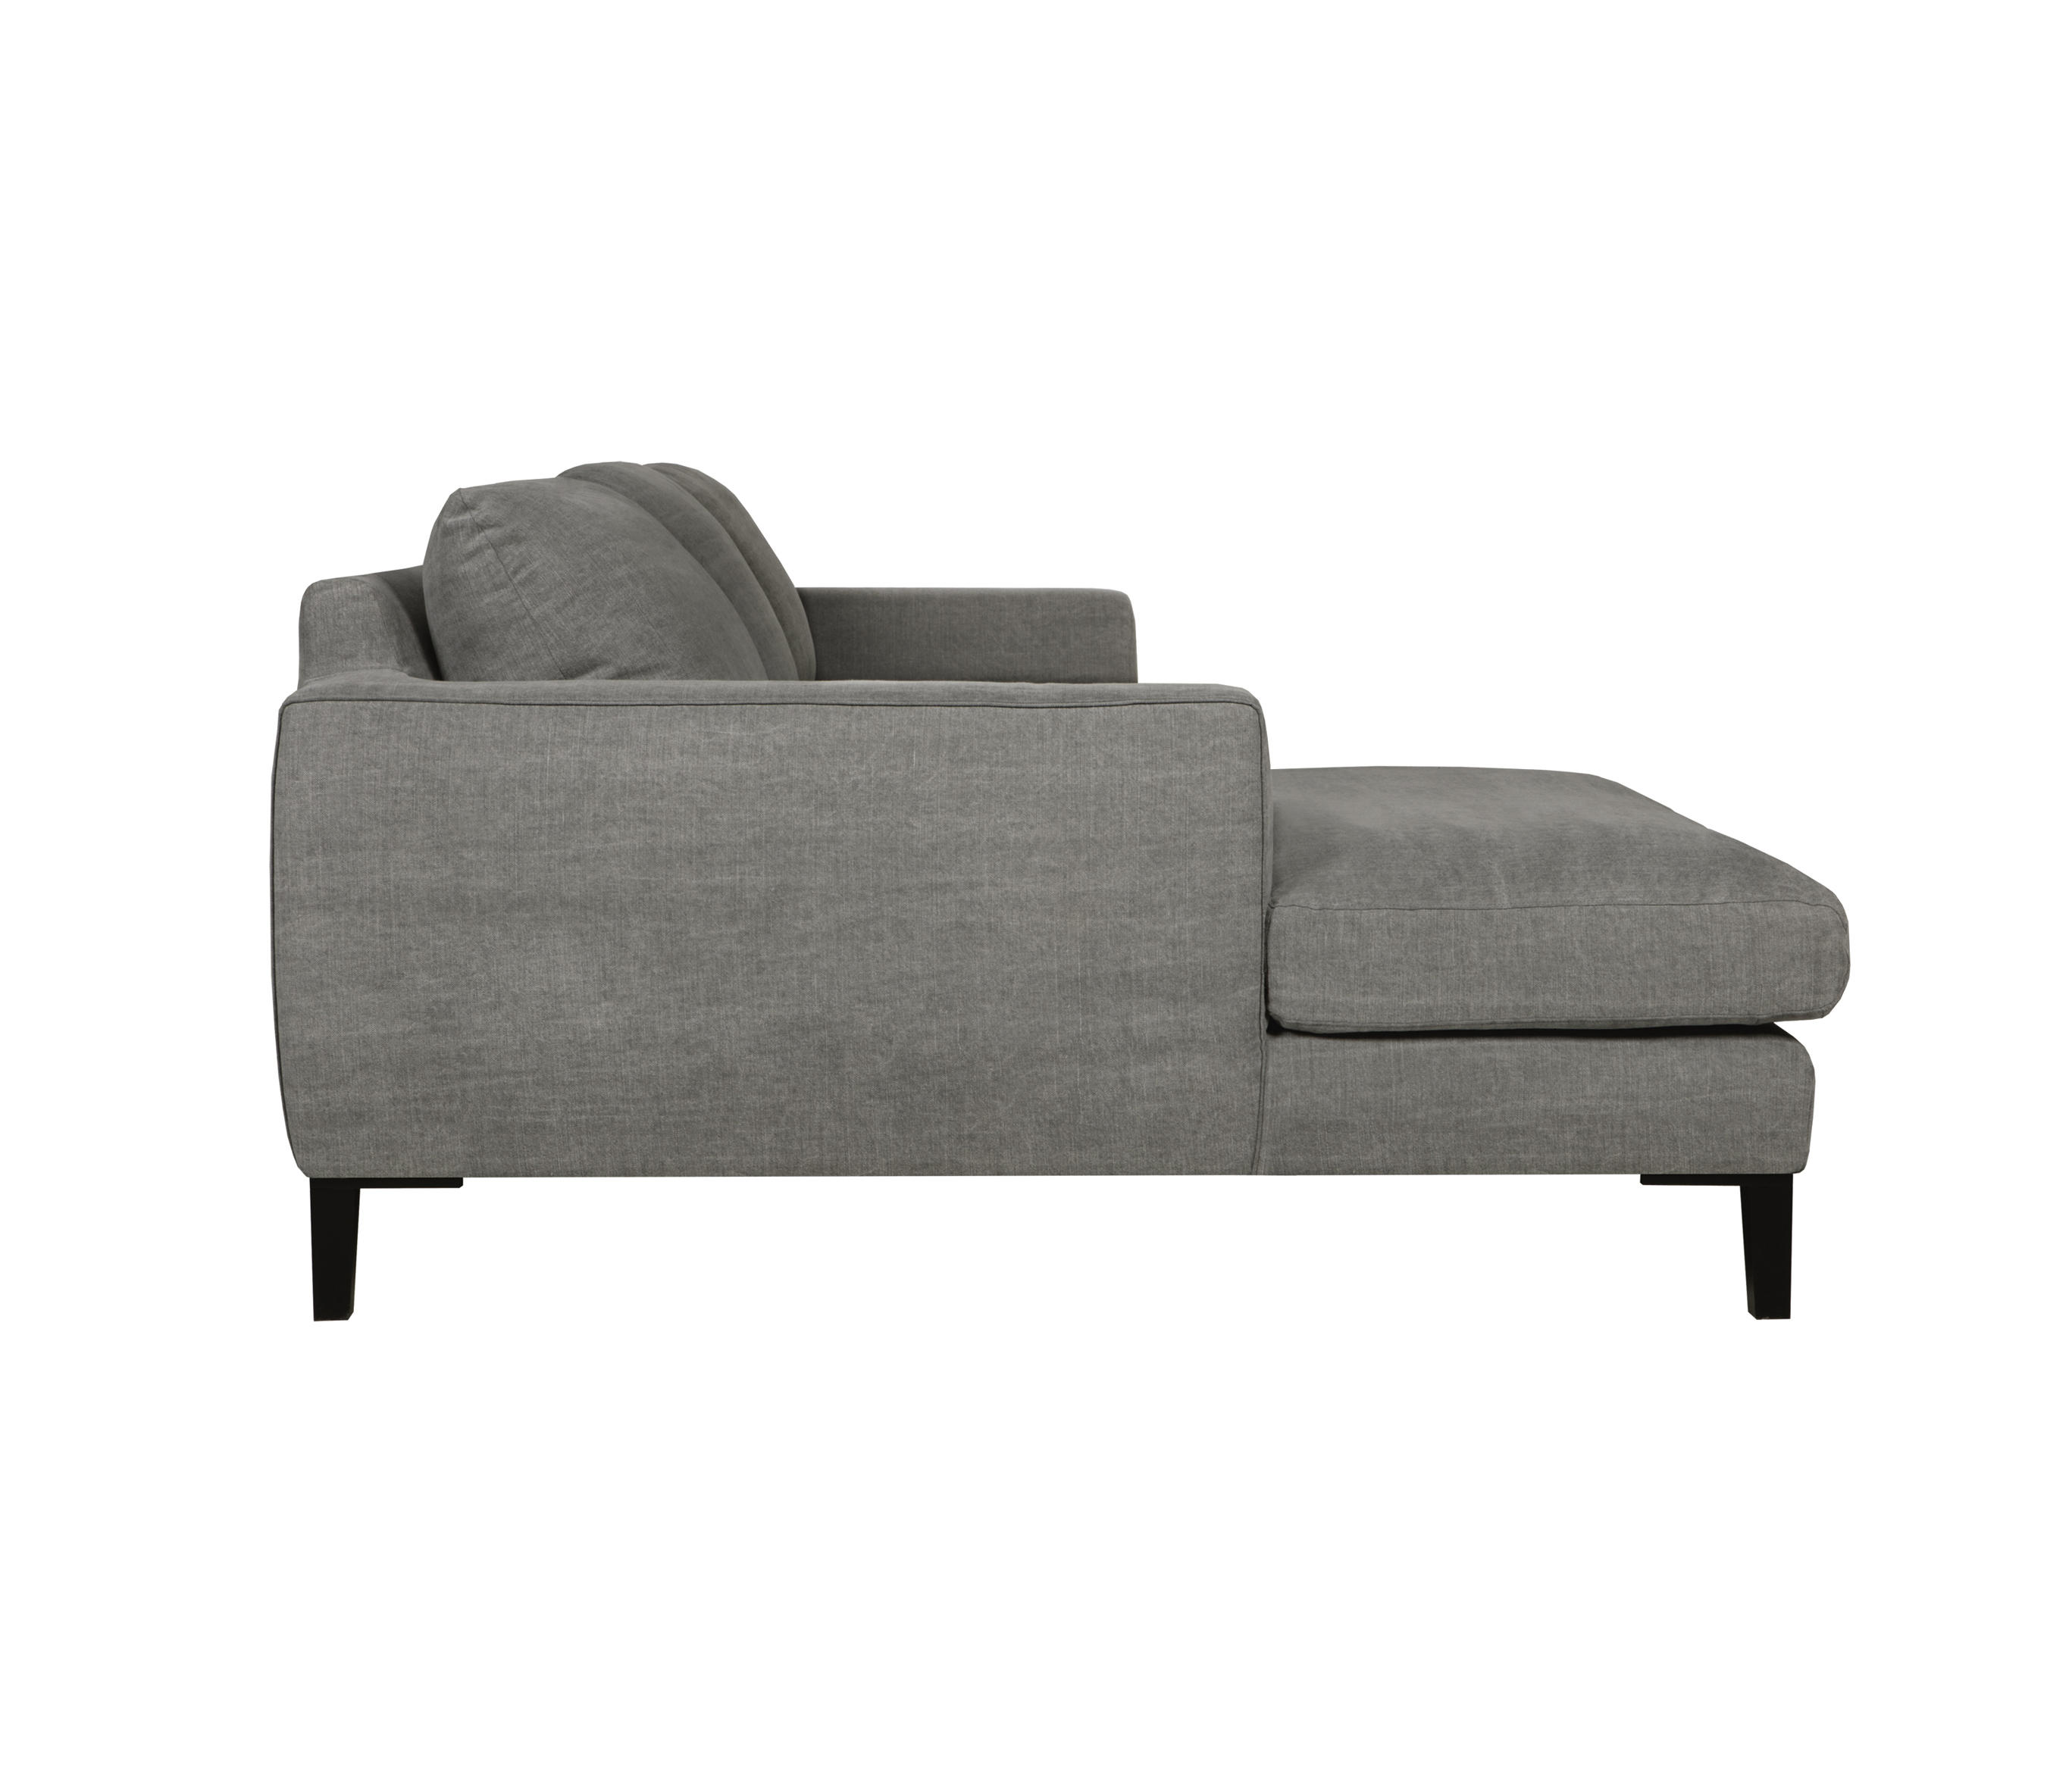 MALIN - Sofas from SITS | Architonic